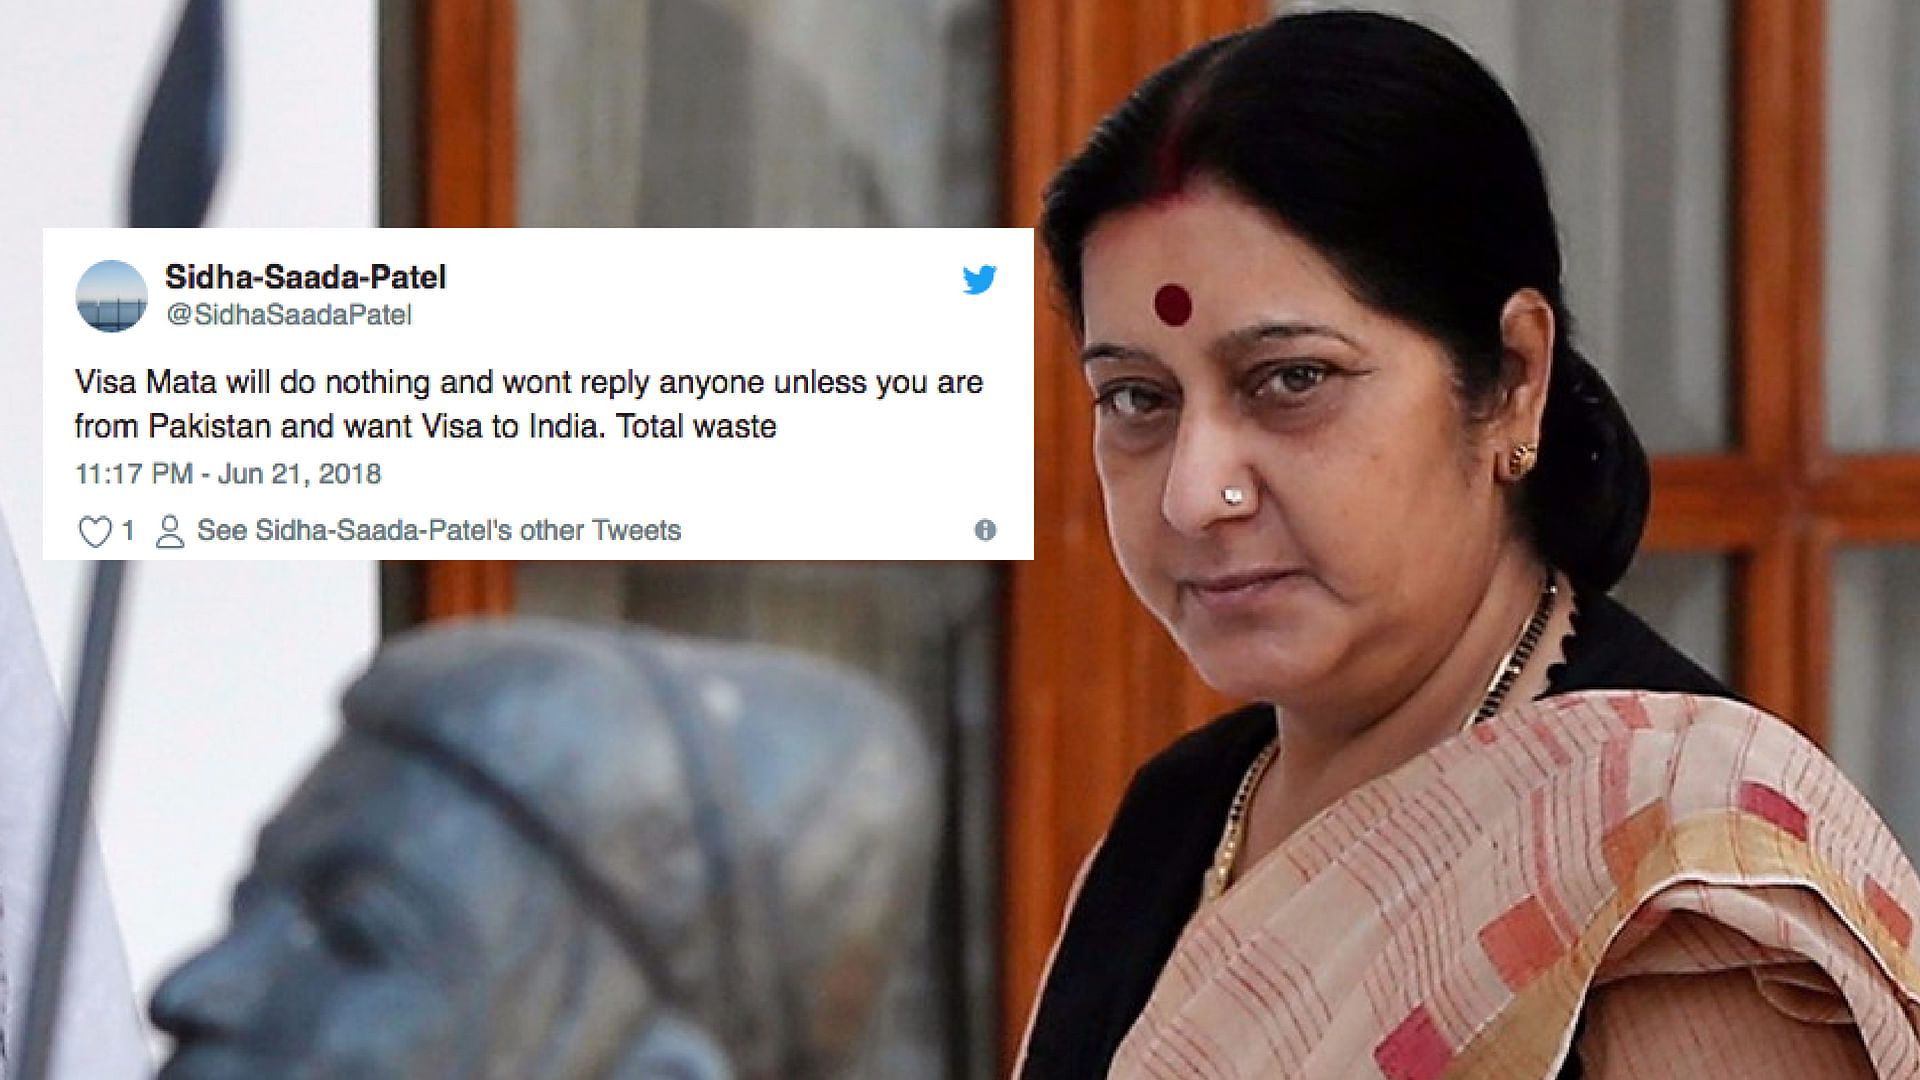 In a sarcastic tweet, Sushma Swaraj said that she was honoured to receive them and has ‘liked’ them for her followers to see.